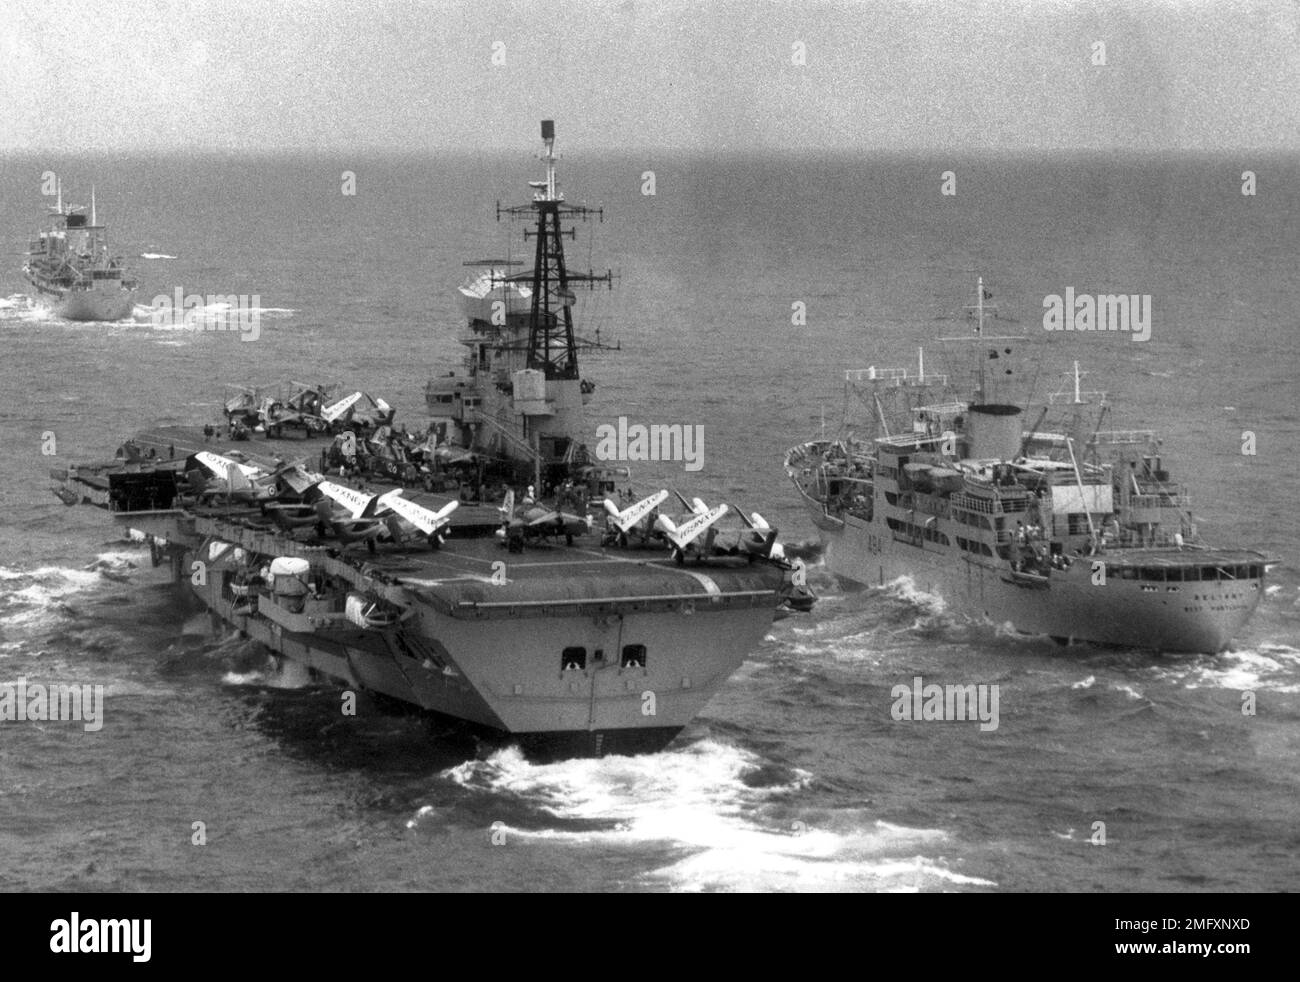 Royal Navy warships R31 HMS Warrior a colossus aircraft carrier alongside A84 RFA Reliant an air stores support ship at sea. Stock Photo